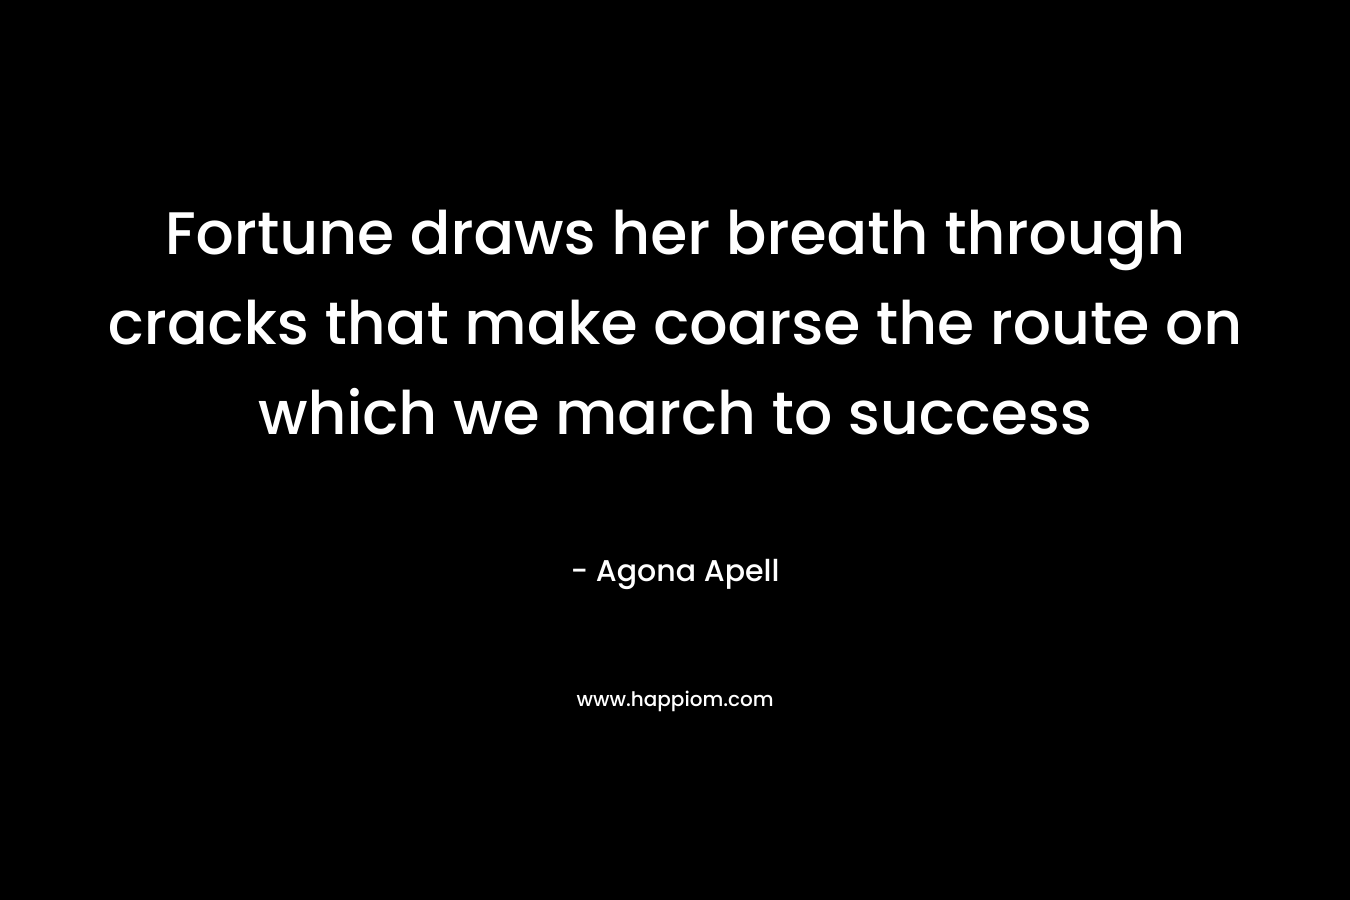 Fortune draws her breath through cracks that make coarse the route on which we march to success